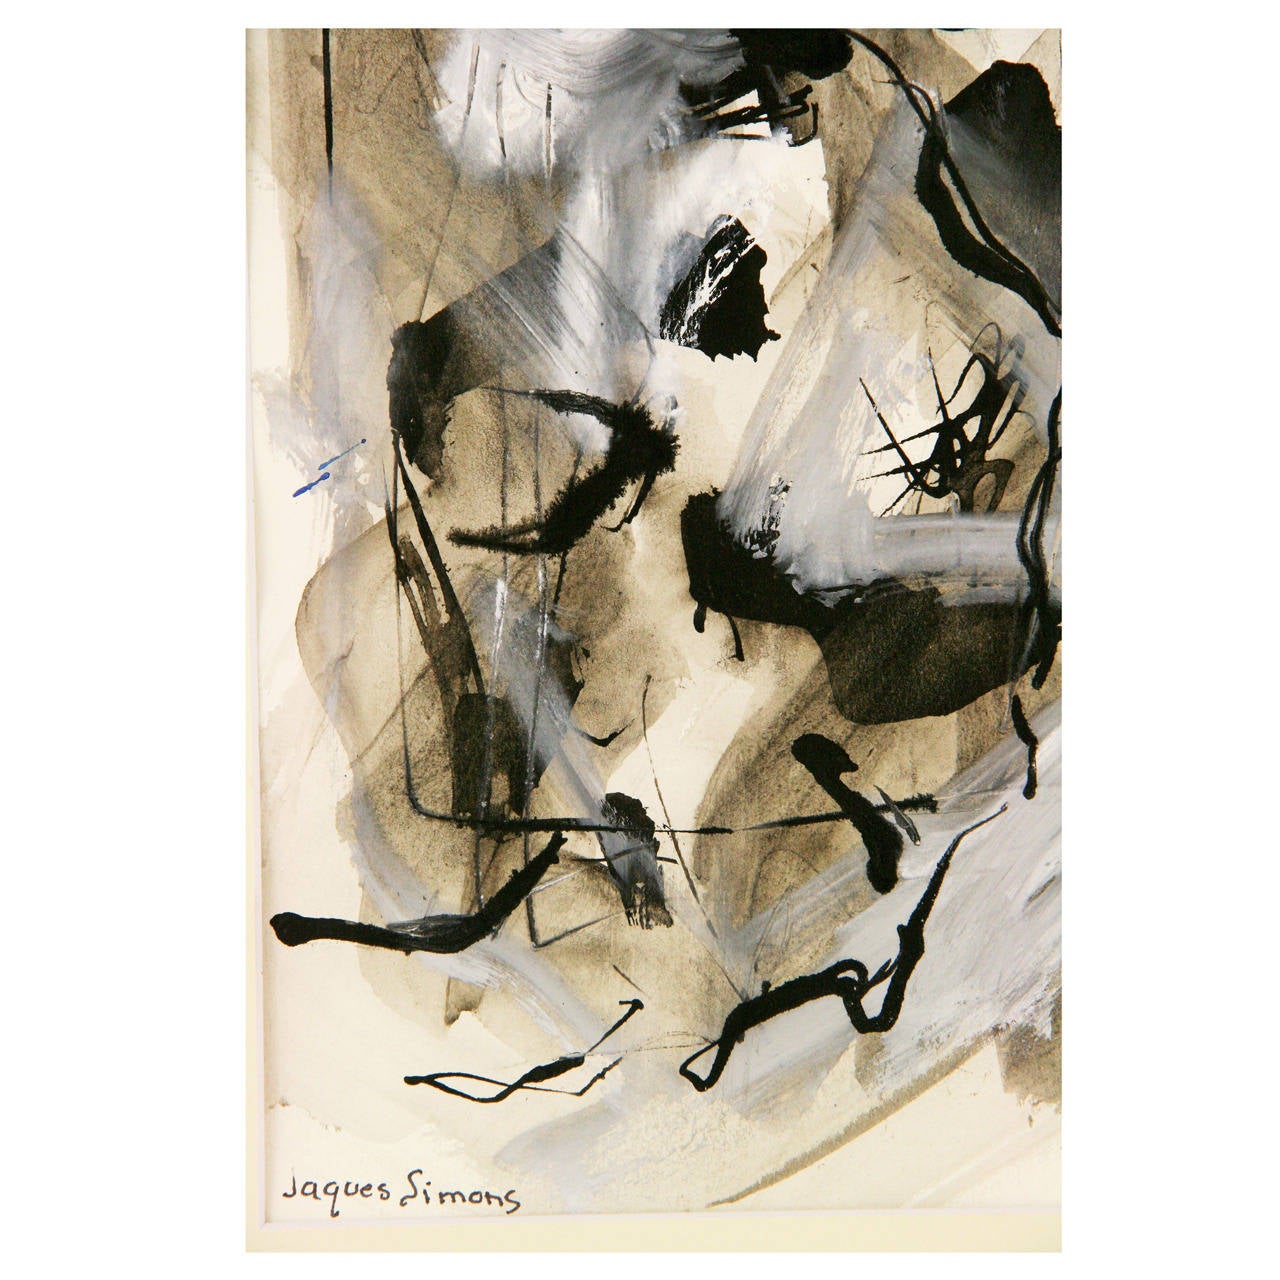 A vintage black and white ink gouache on paper signed by Jaques Simons lower left. Displayed in a mat. Measuring image size is 9.5 H x 7 W. Unframed.